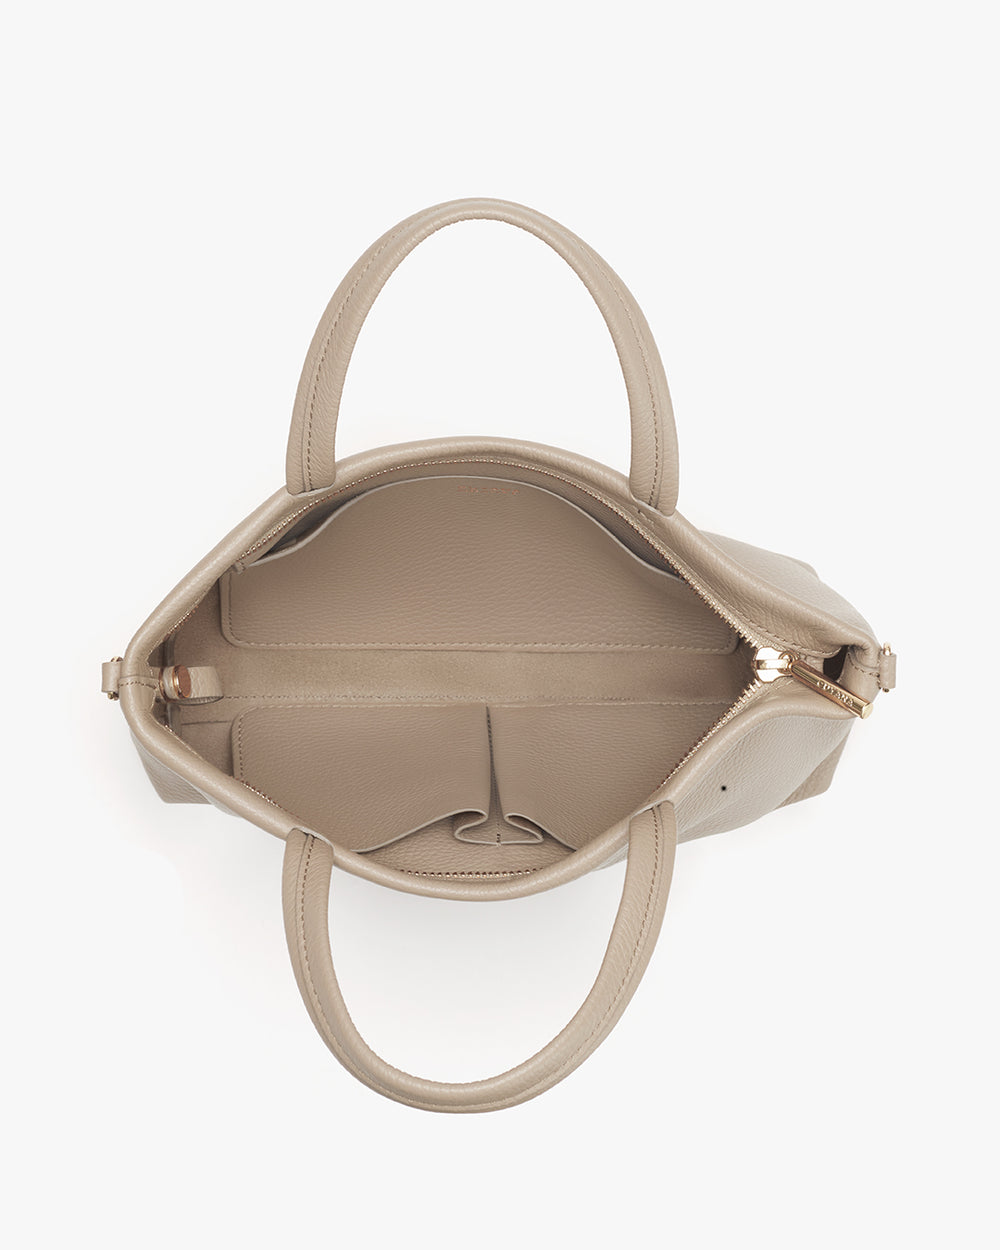 Top view of an open handbag showing the interior.